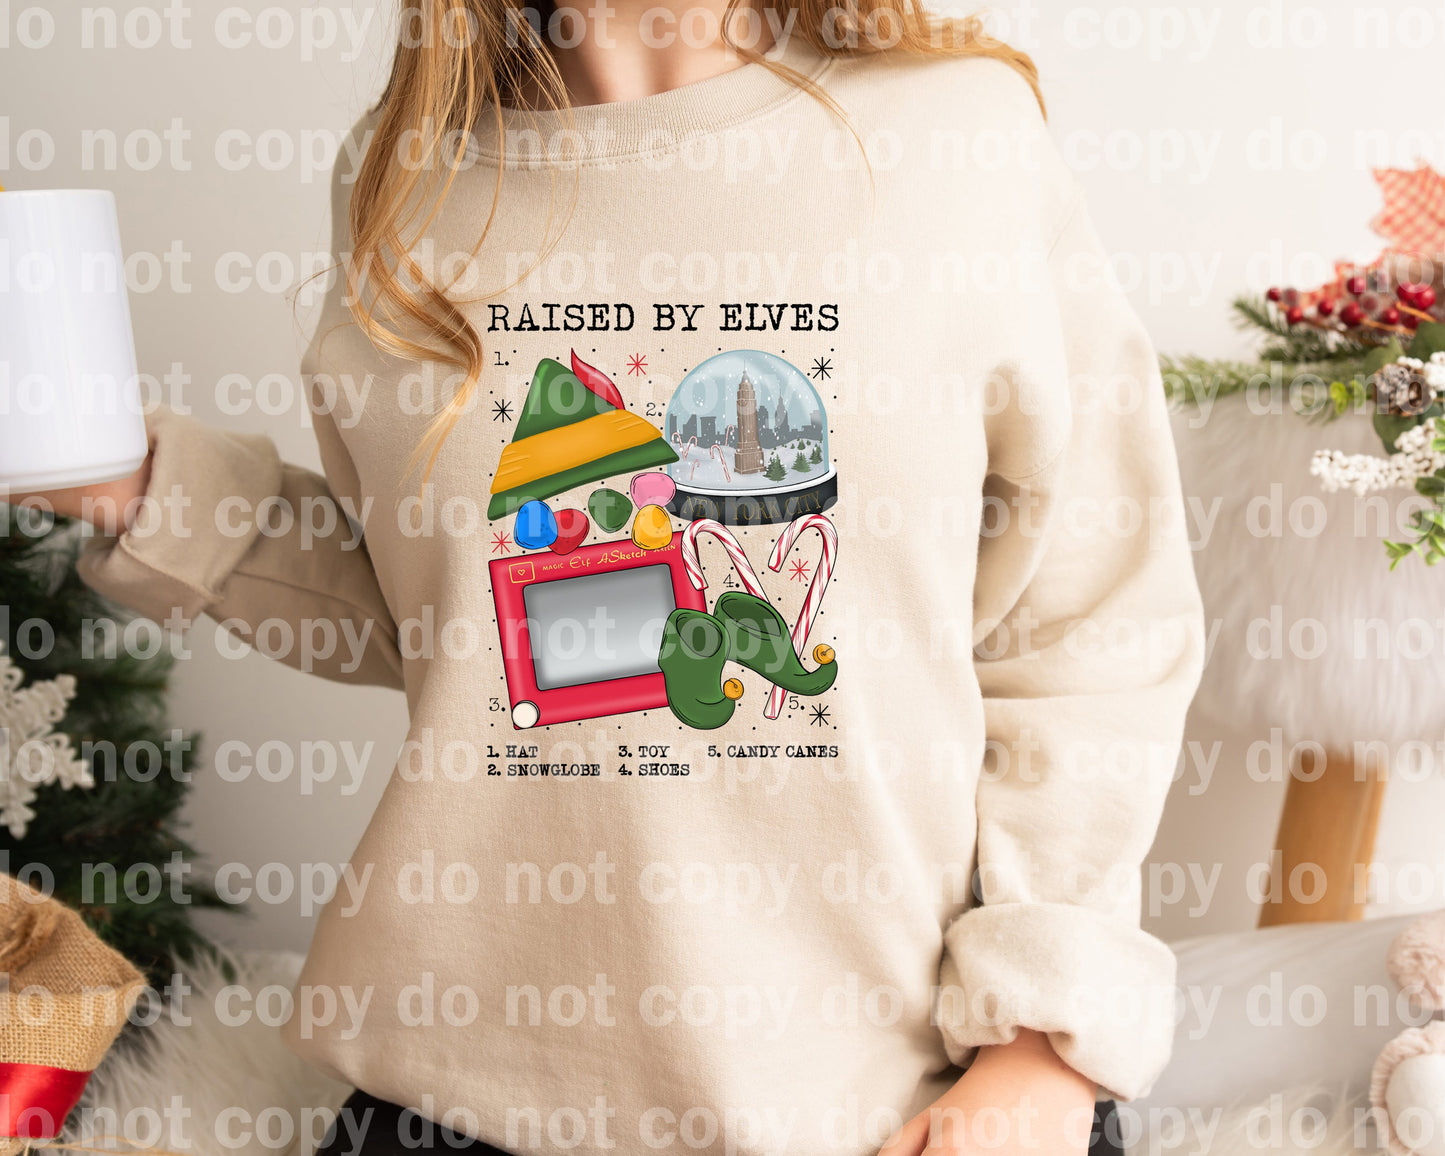 Raised By Elves Dream Print or Sublimation Print